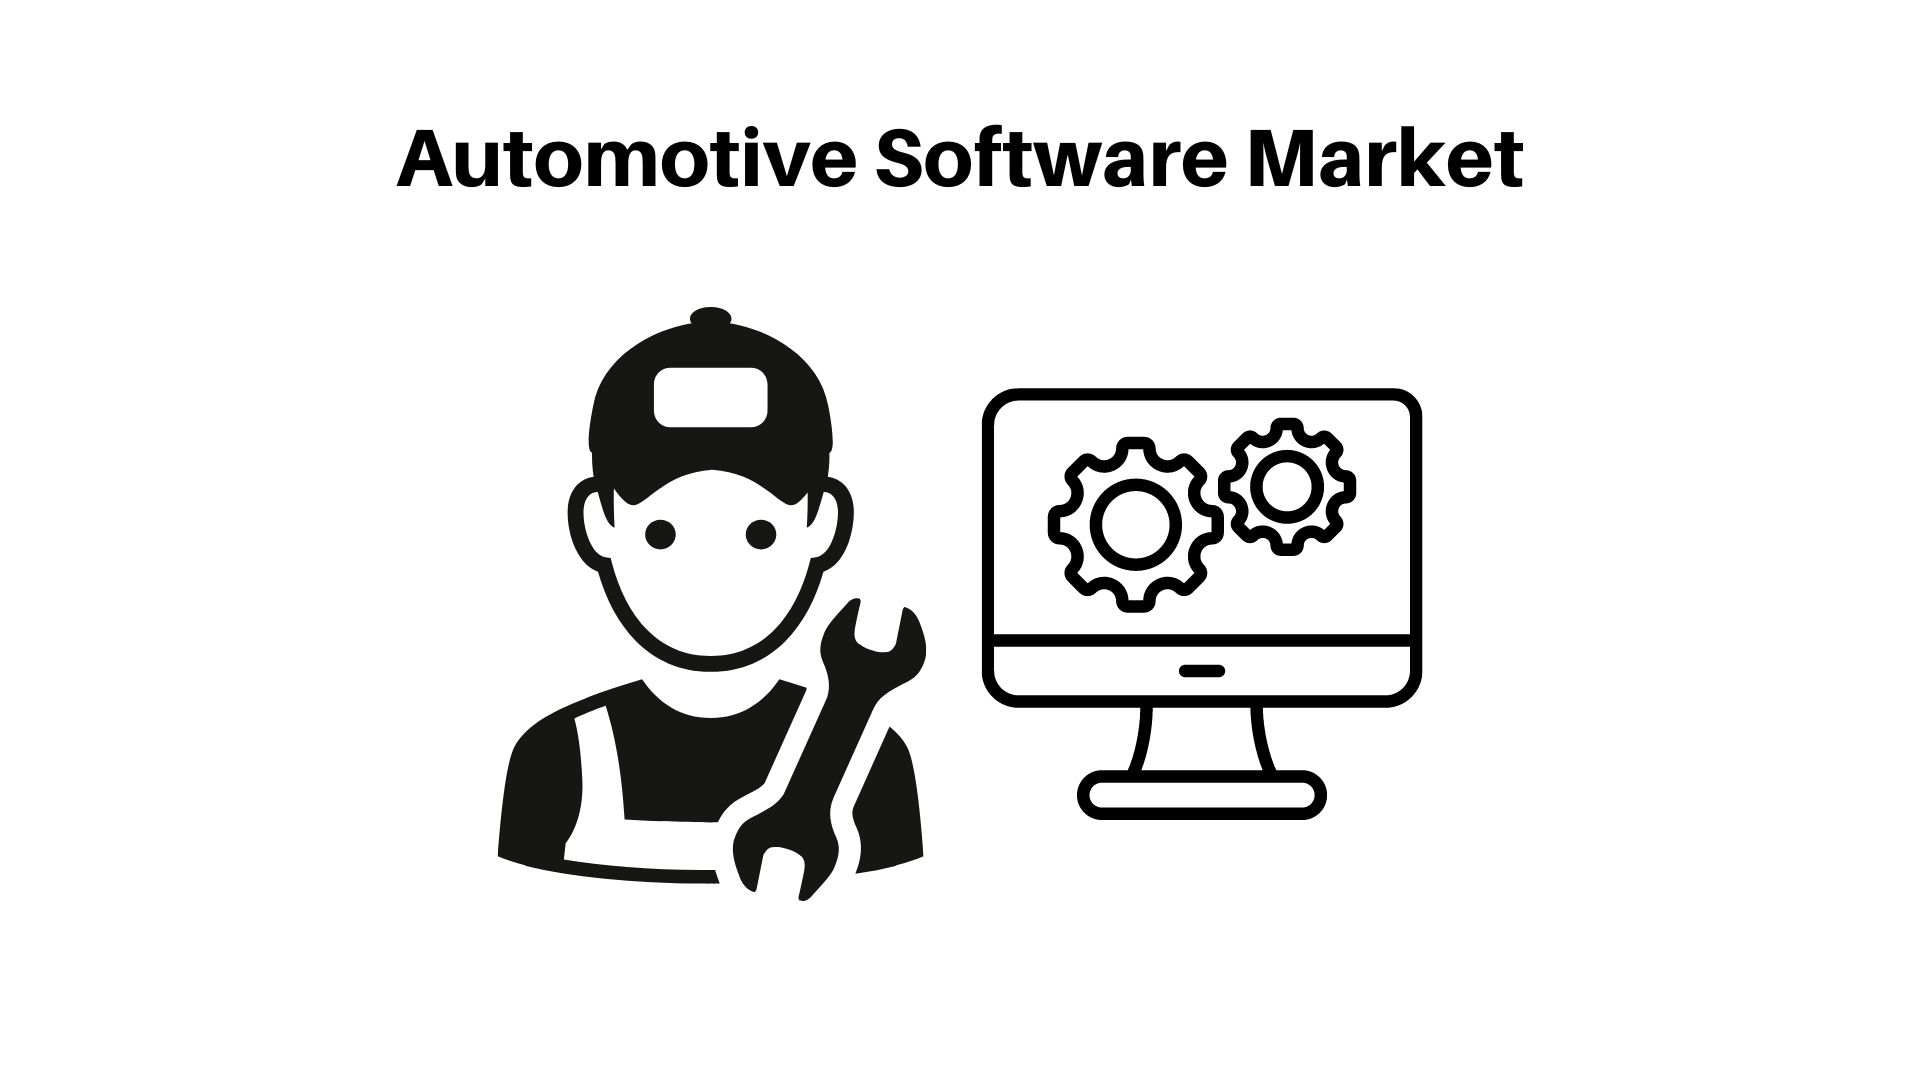 Automotive Software Market was valued at nearly USD 72.1 billion by 2032